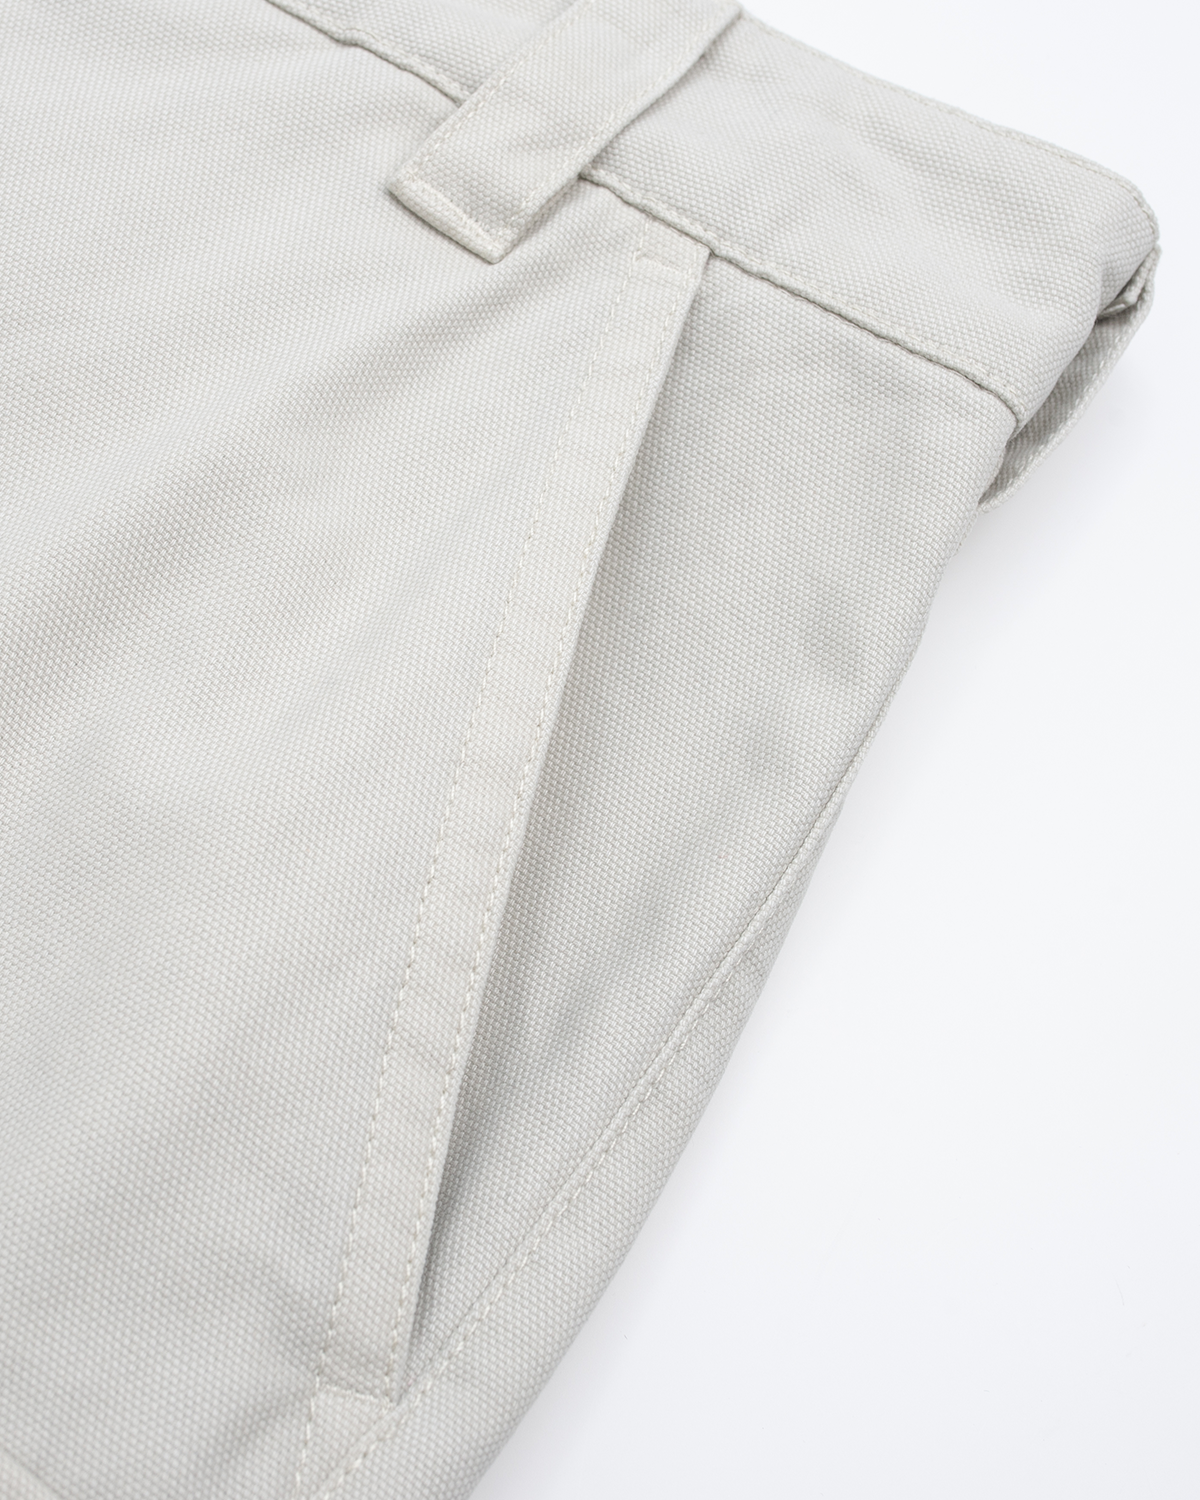 Off The Label cargo trouser greyish white